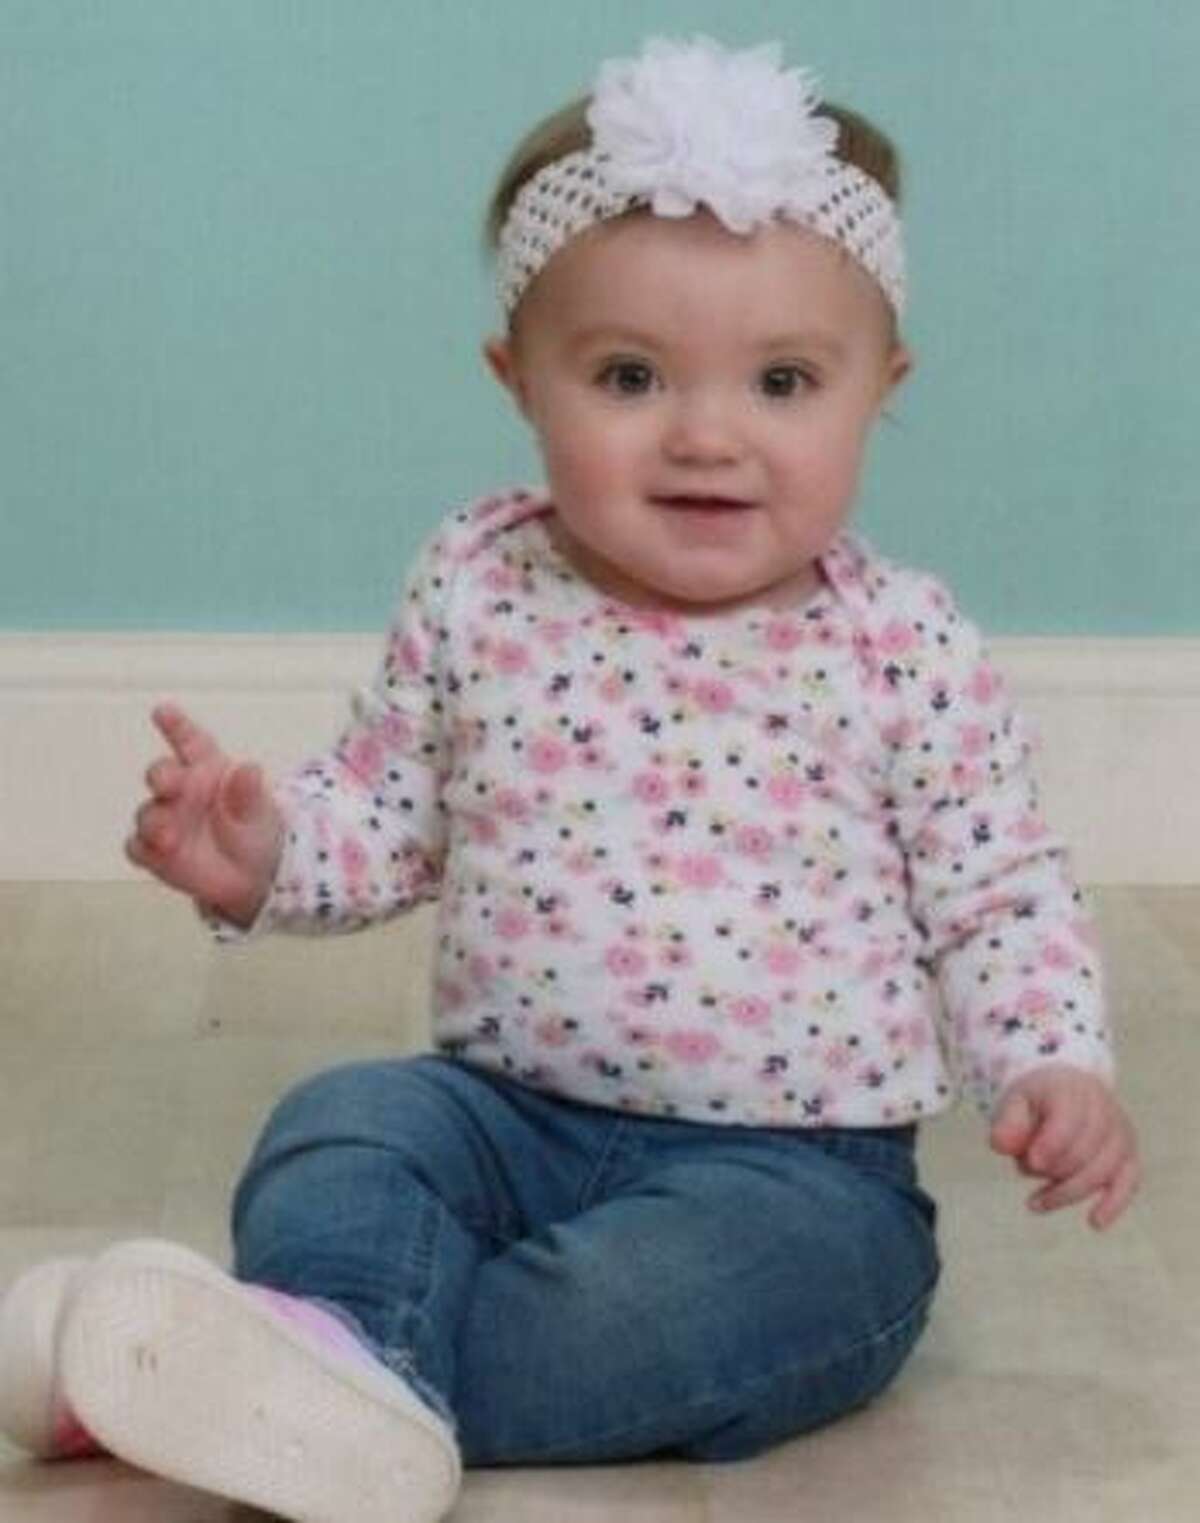  A White Hall gym is holding a fundraiser May 22 for the family of Danika Alderfers, an 11-month-old girl who died in a March 31 house fire. 